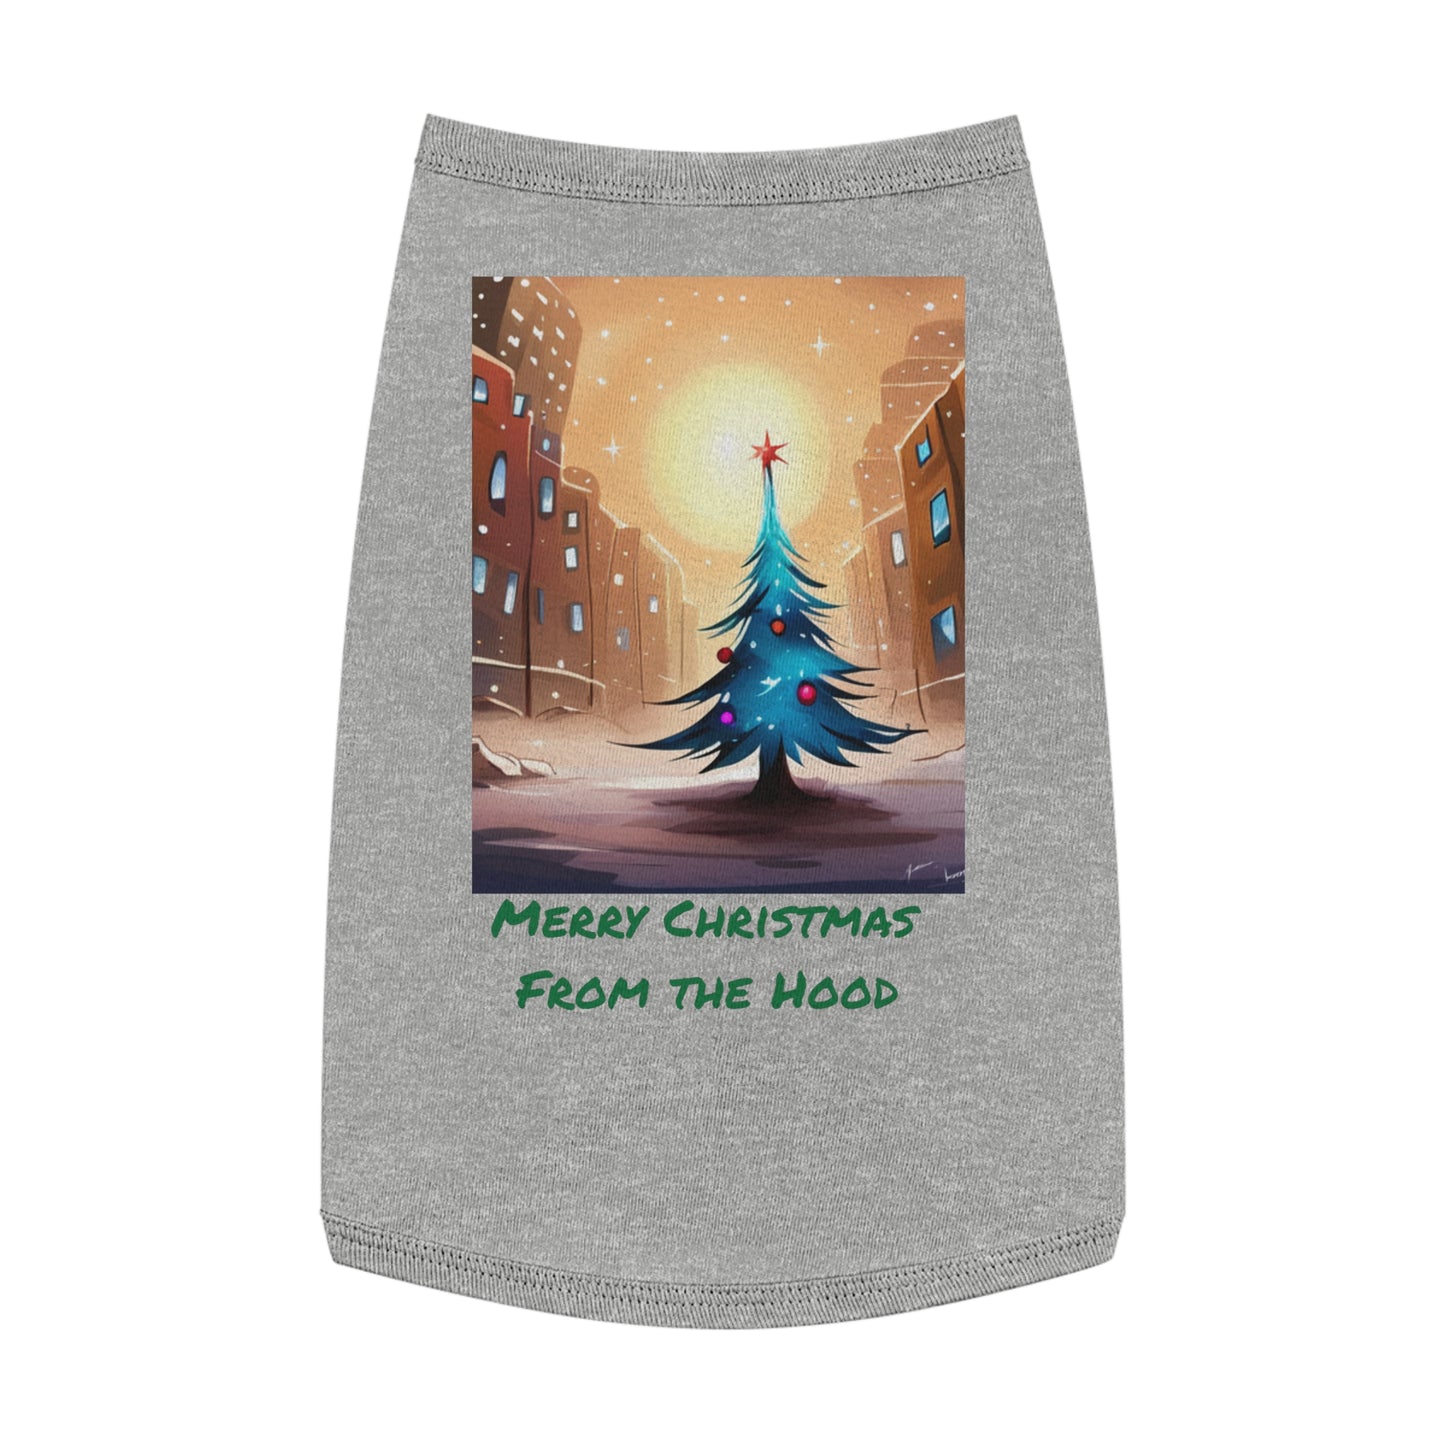 Large Size Merry Christmas From the Hood Dog Shirt